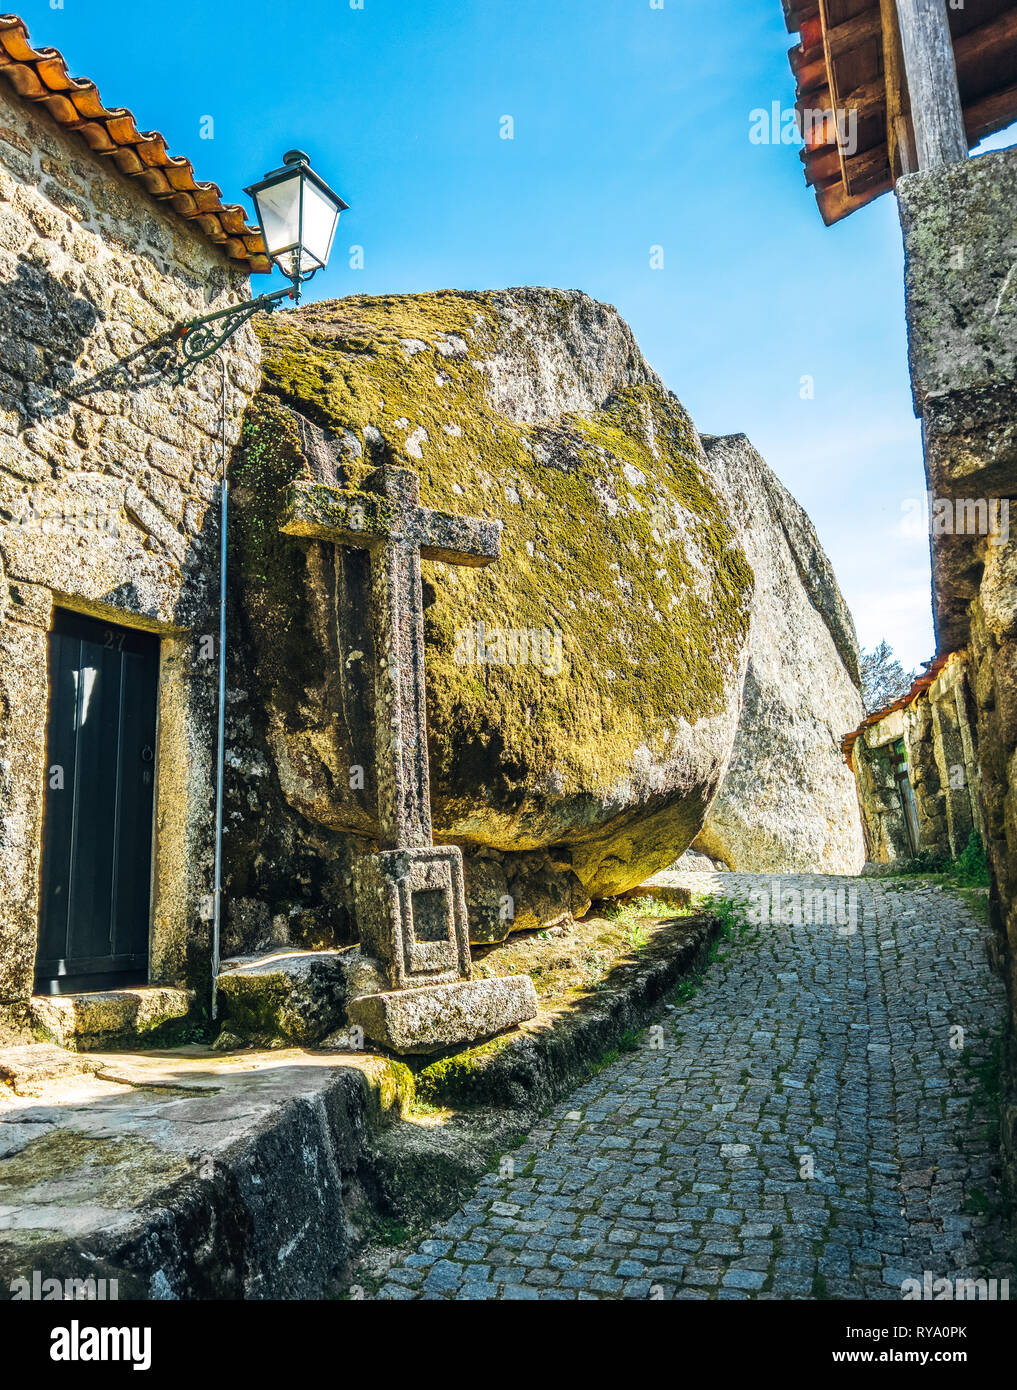 Looking up a narrow cobbled street in the ancient granite boulder village of Monsanto. Gigantic Boulder houses of a hilltop town. Amazing architecture Stock Photo